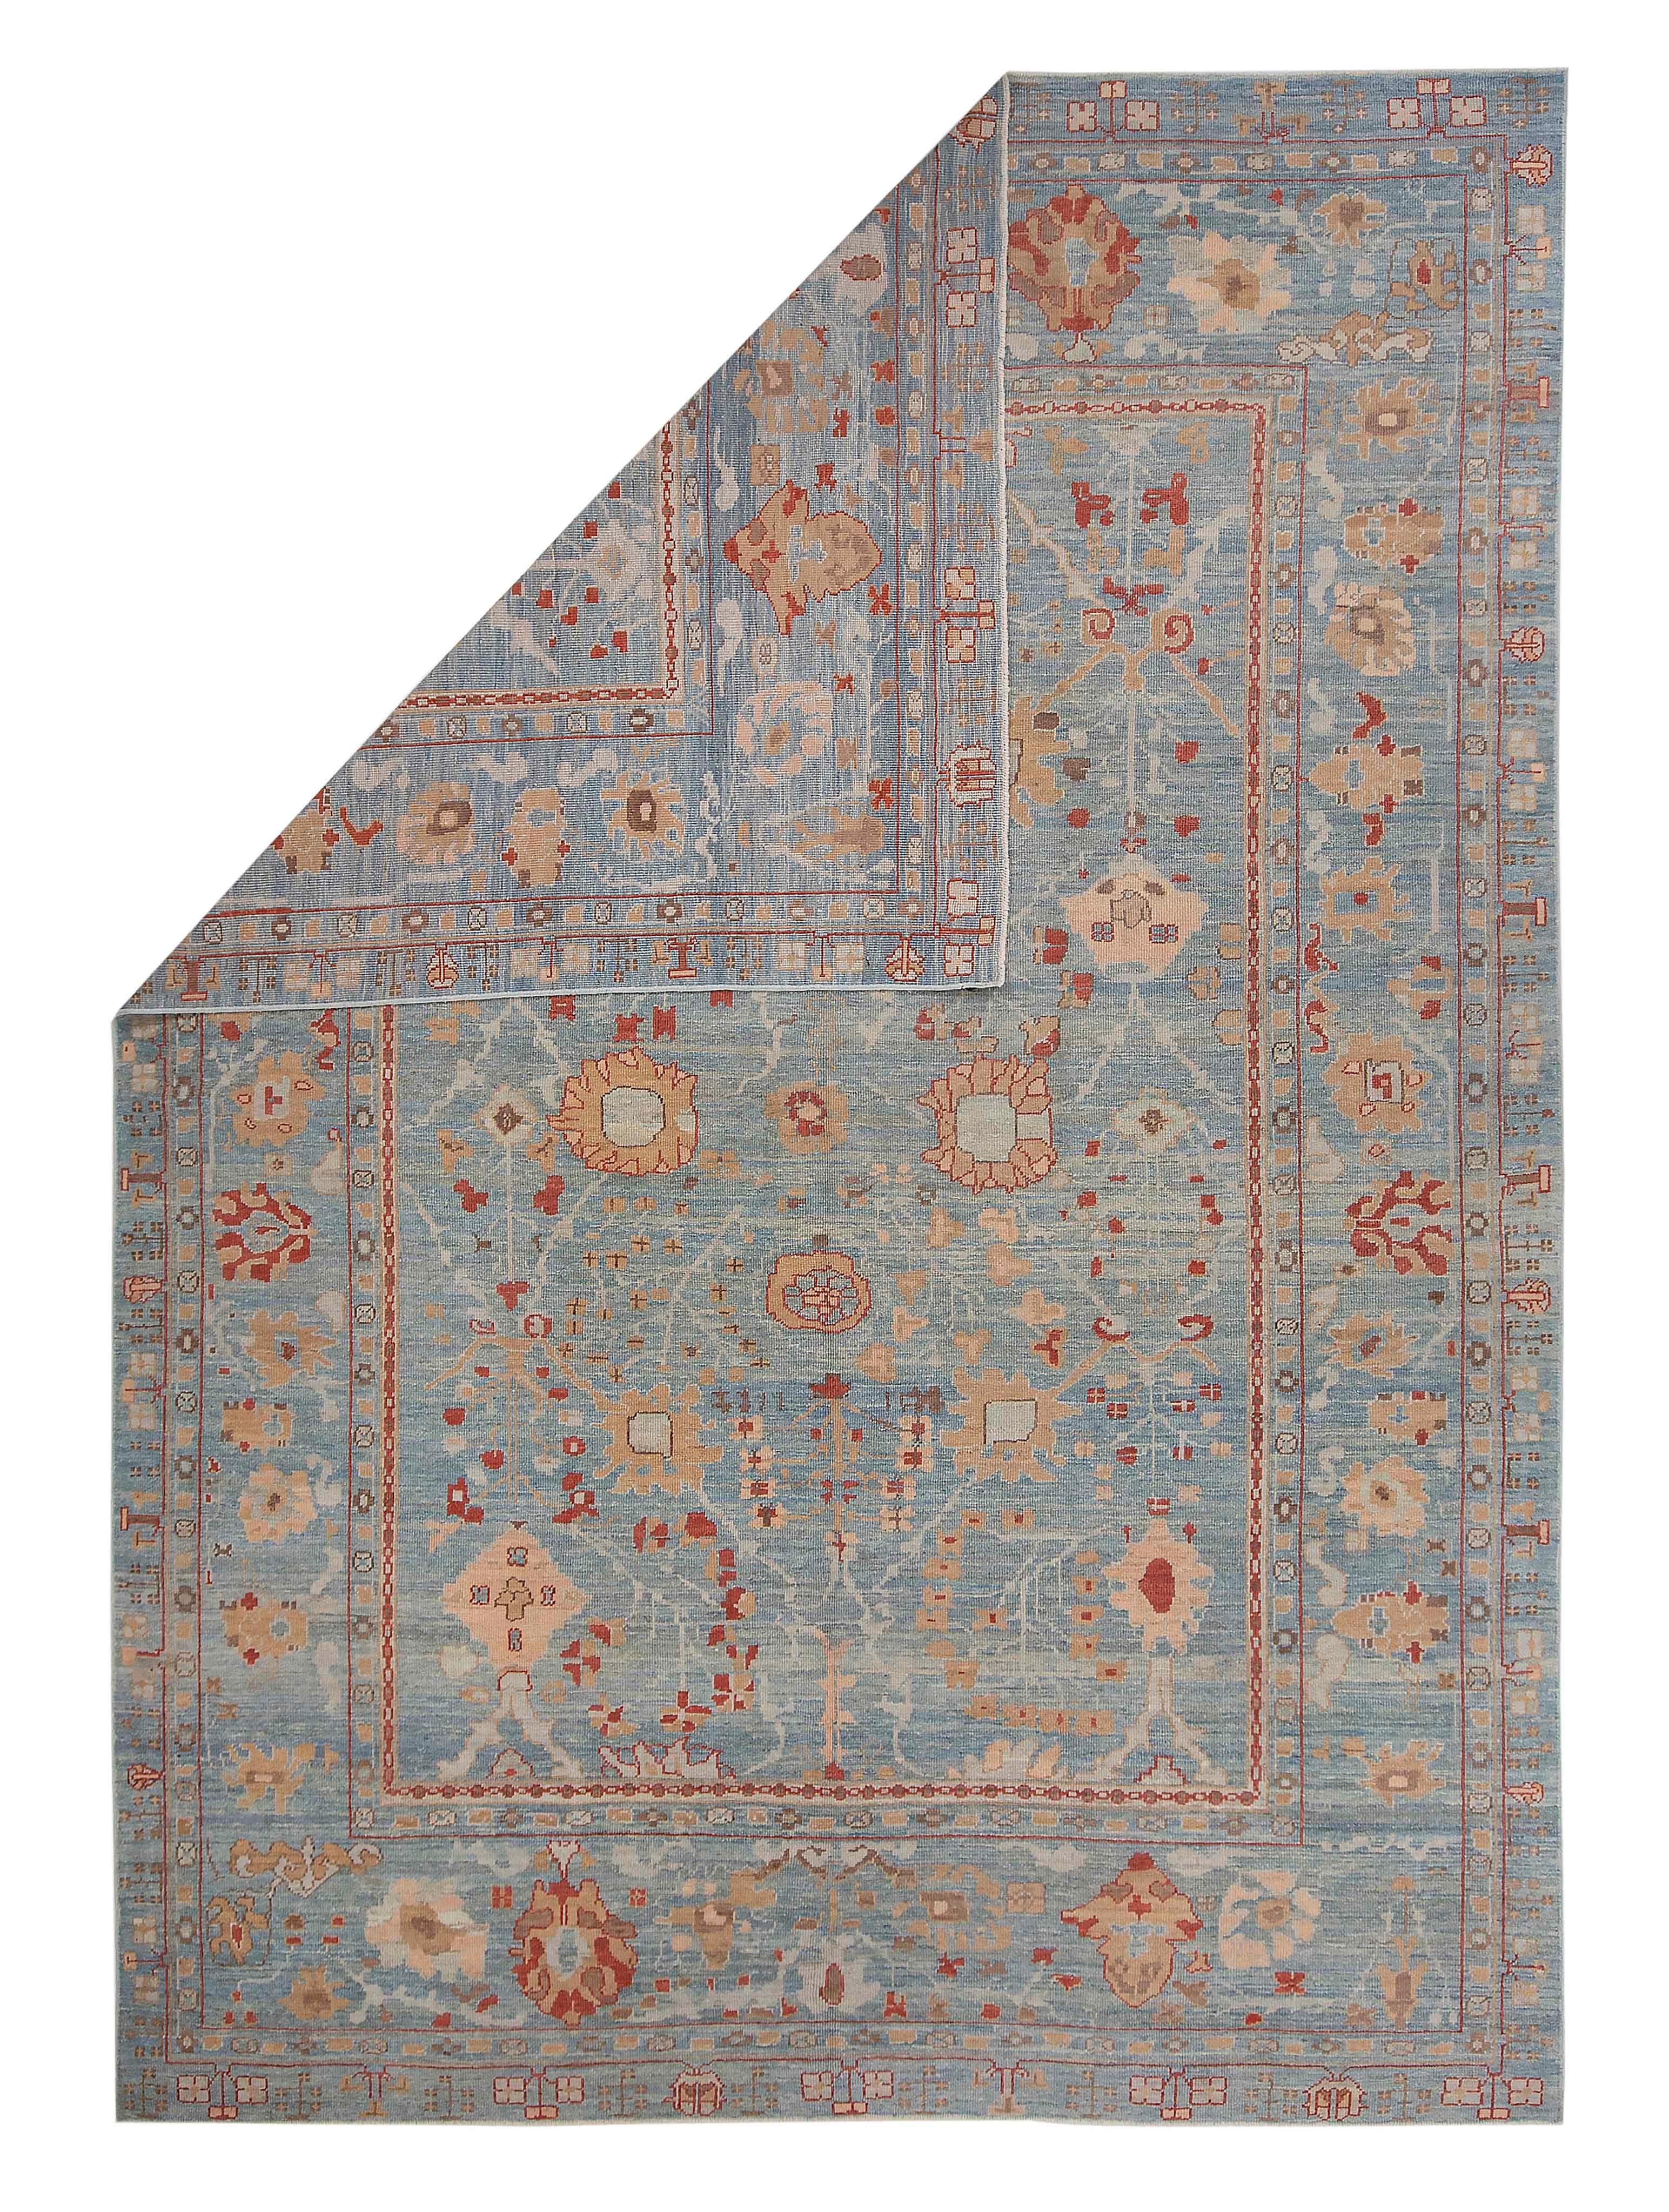 Hand-Woven New Turkish Oushak Rug with Red & Brown Floral Details on Blue Gray Field For Sale